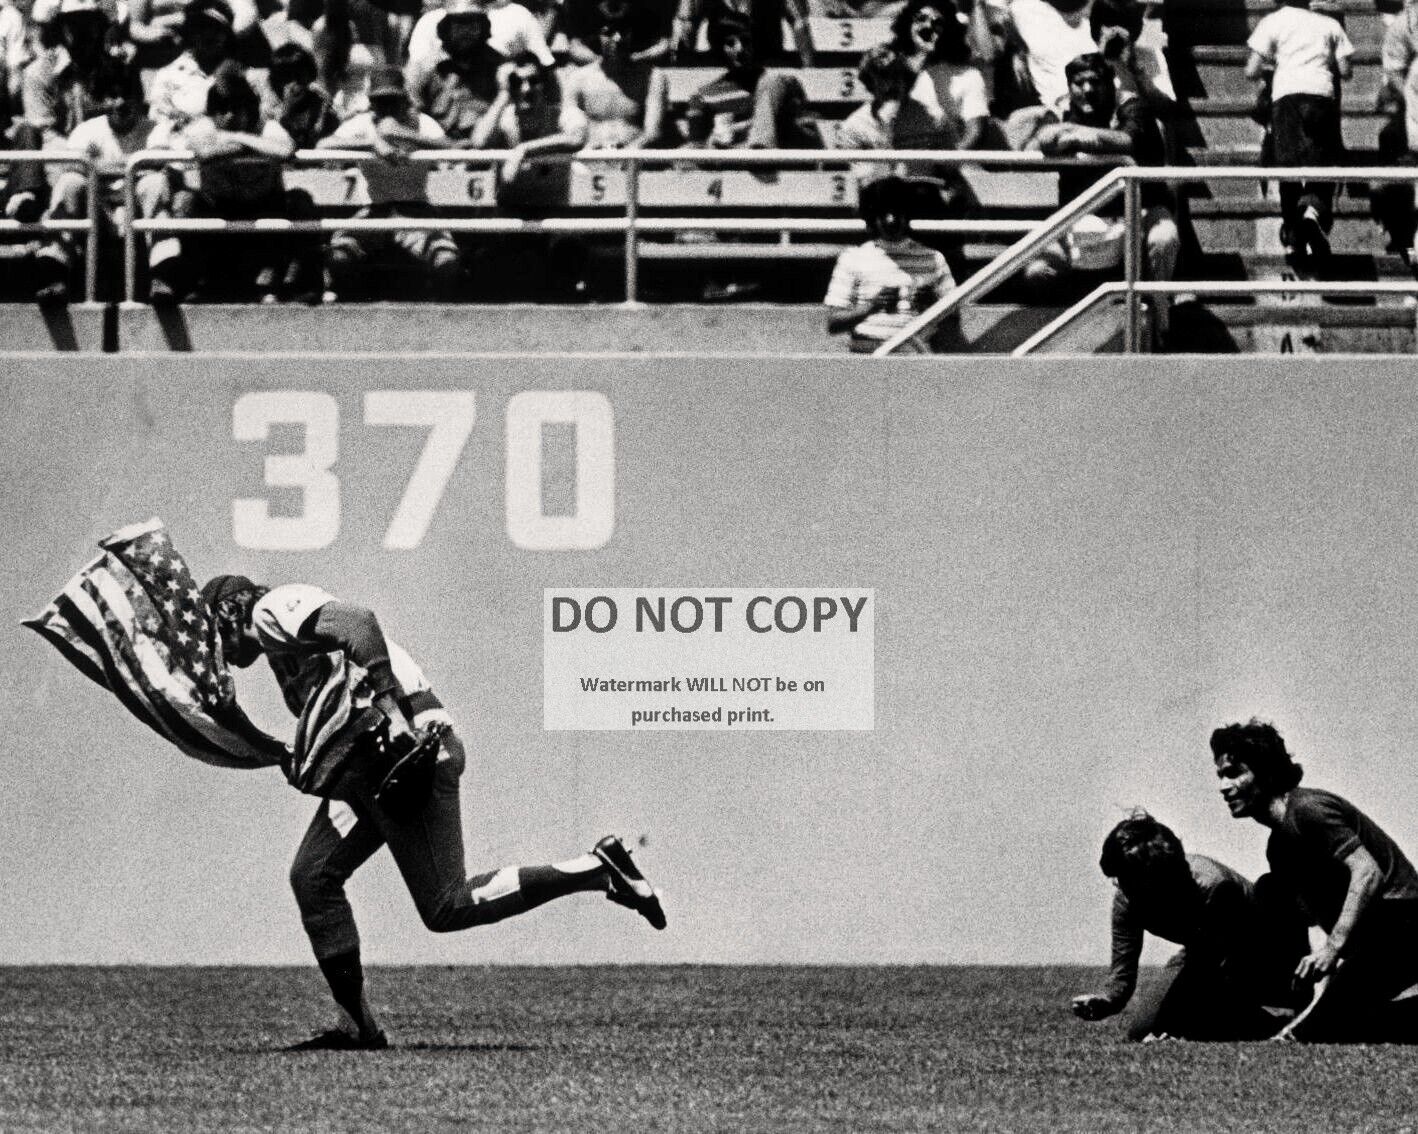 11X14 PHOTO RICK MONDAY CUBS OUTFIELDER SAVES THE FLAG @ DODGER STADIUM (EP-900)